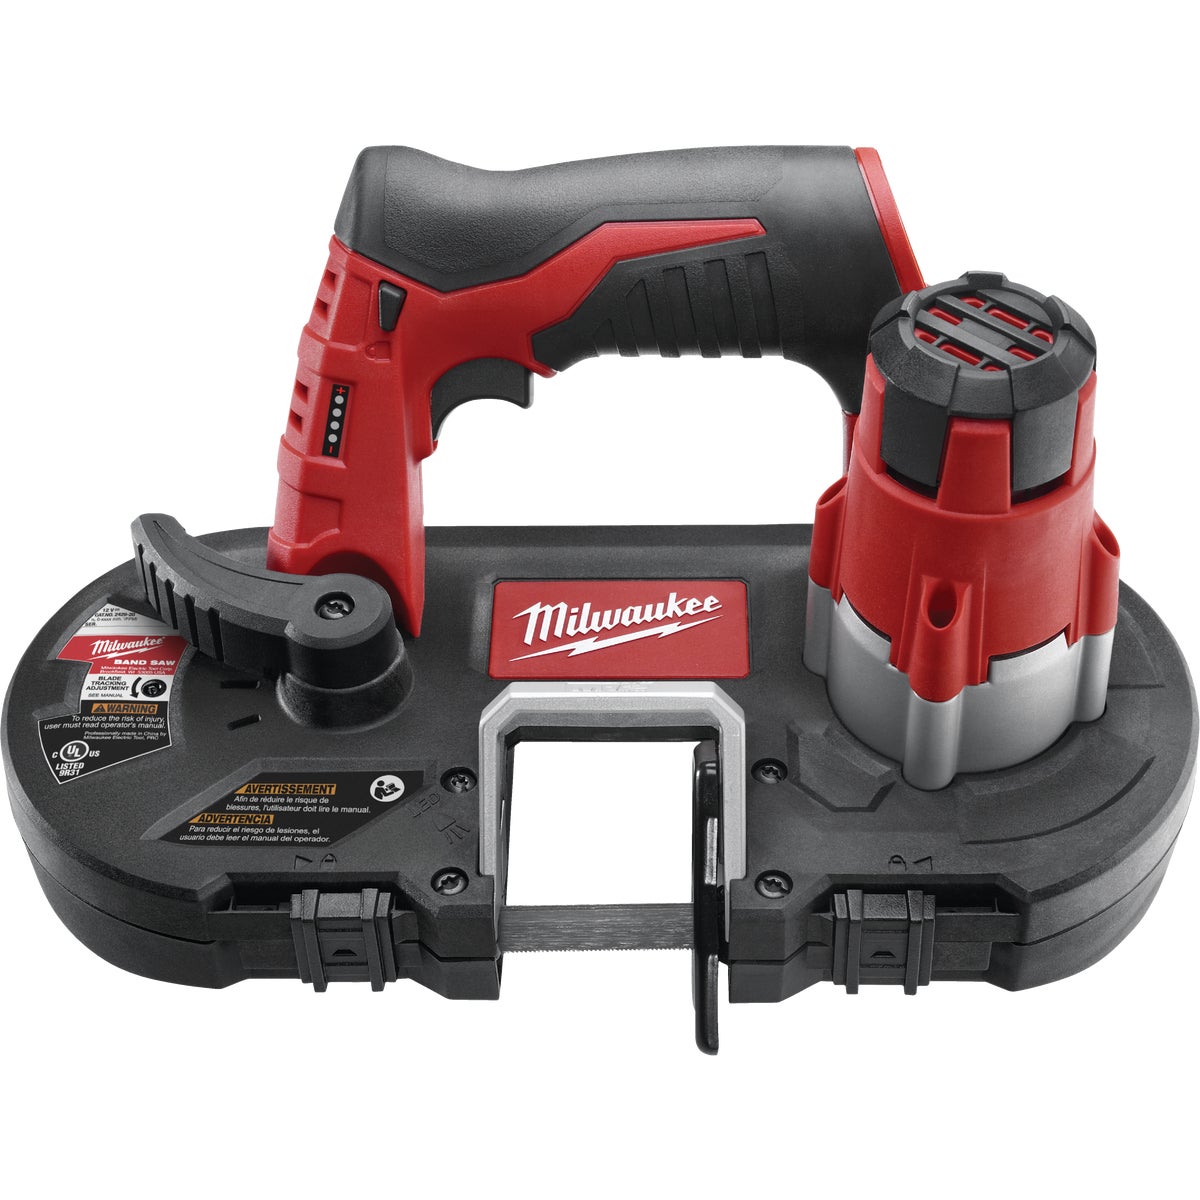 Milwaukee M12 12 Volt Lithium-Ion Sub-Compact Cordless Band Saw (Tool Only)